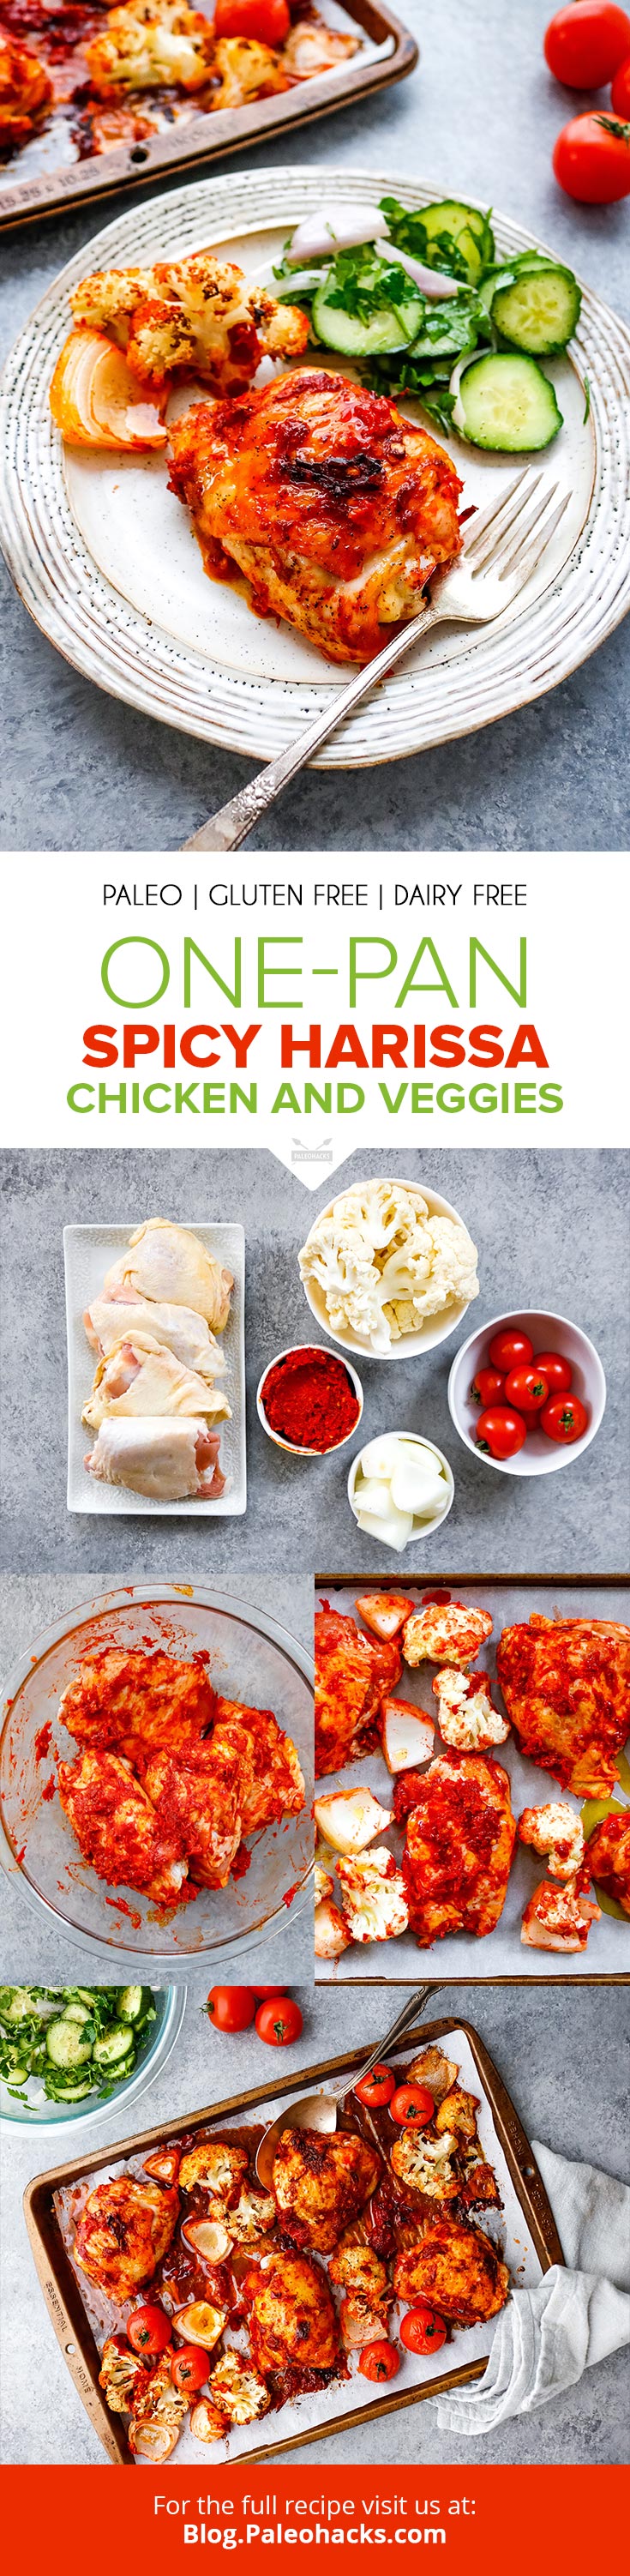 Spice up your life with a juicy chicken recipe made with peppery harissa and an assortment of roasted veggies. That crispy caramelized skin has us begging for more!